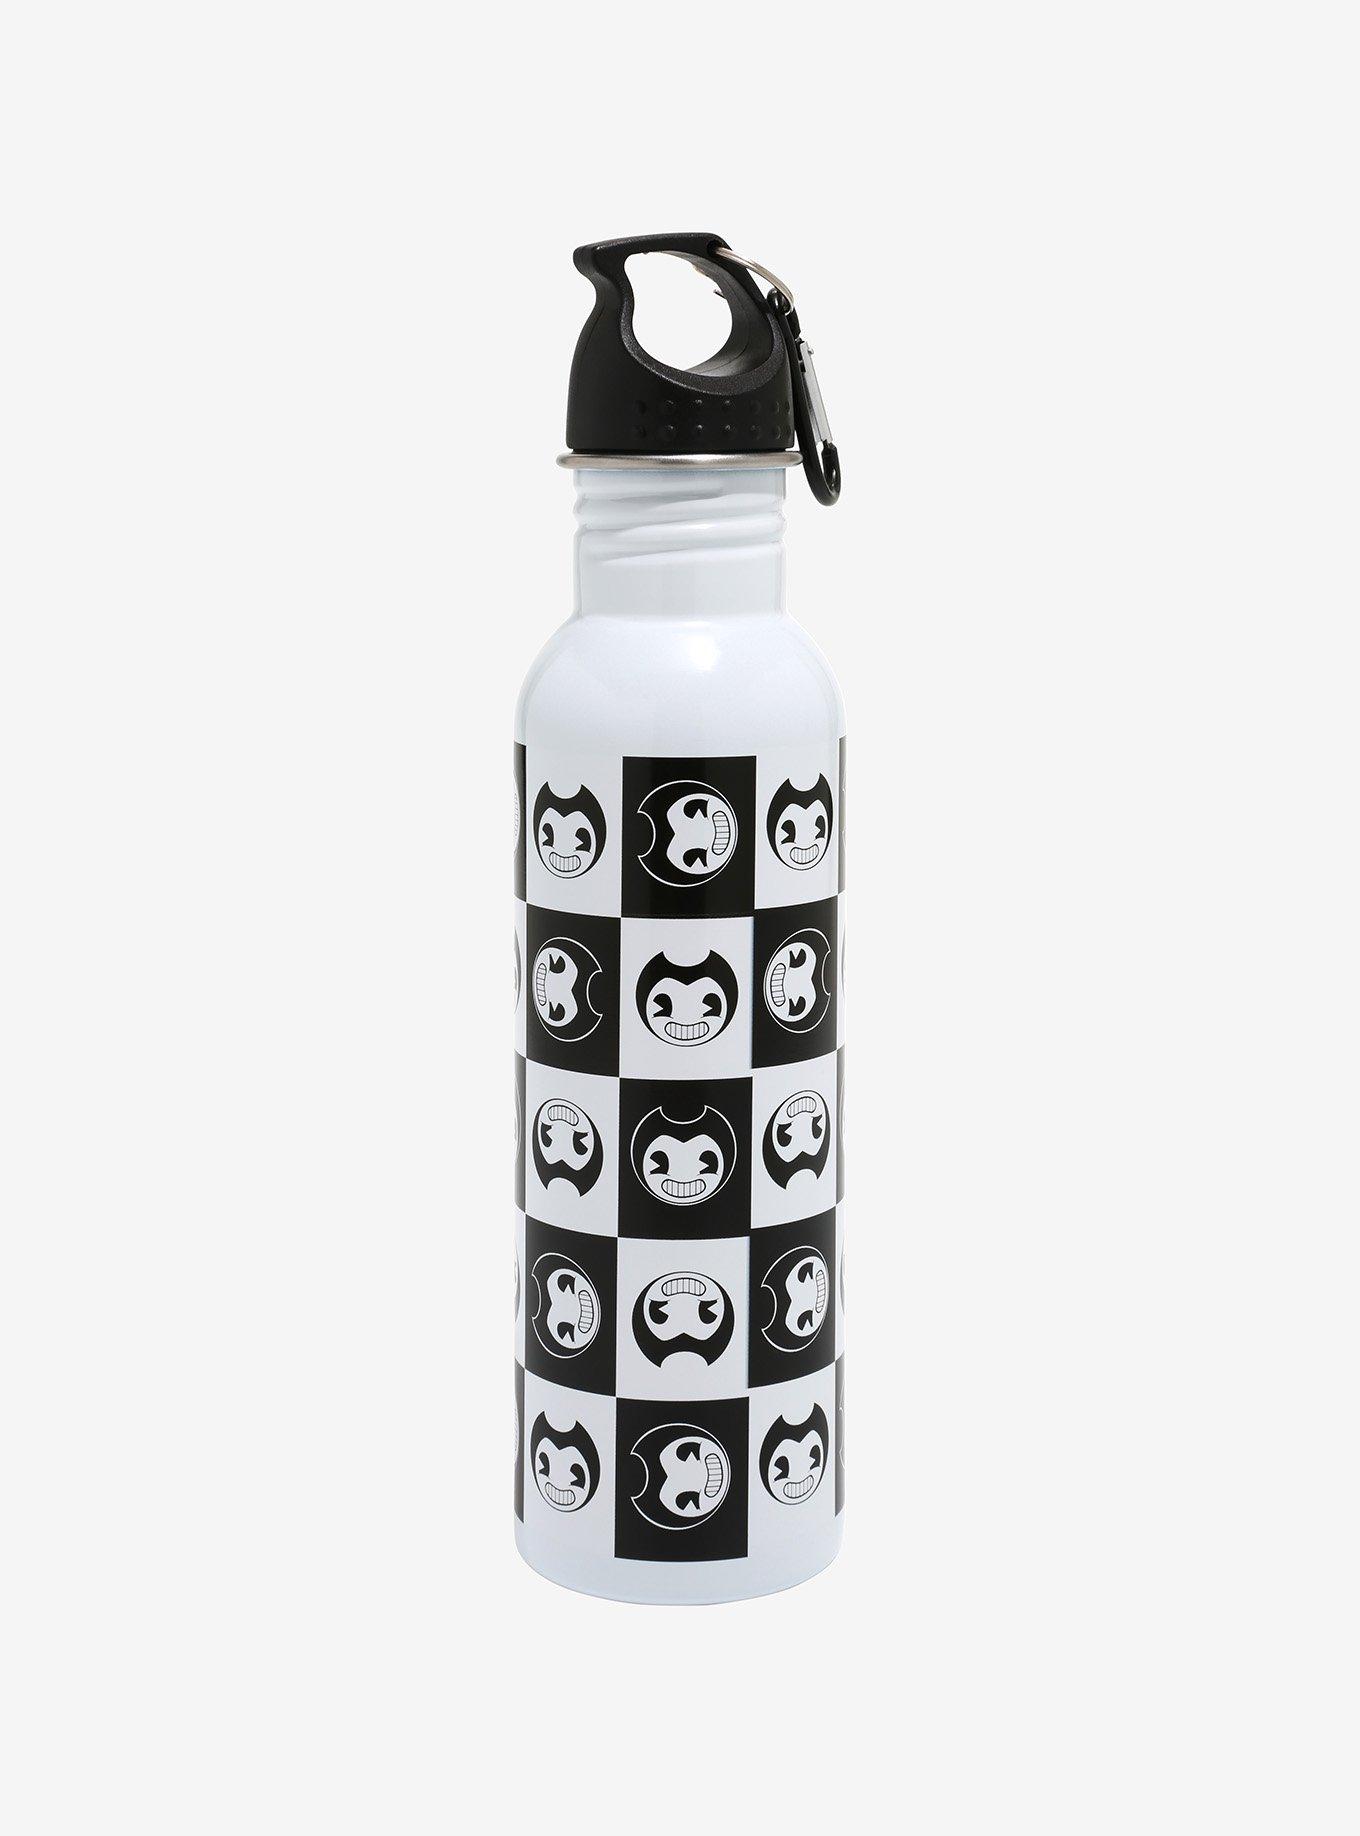 Toy Story Buzz Lightyear, Family Vacation Stainless Steel Water Bottle